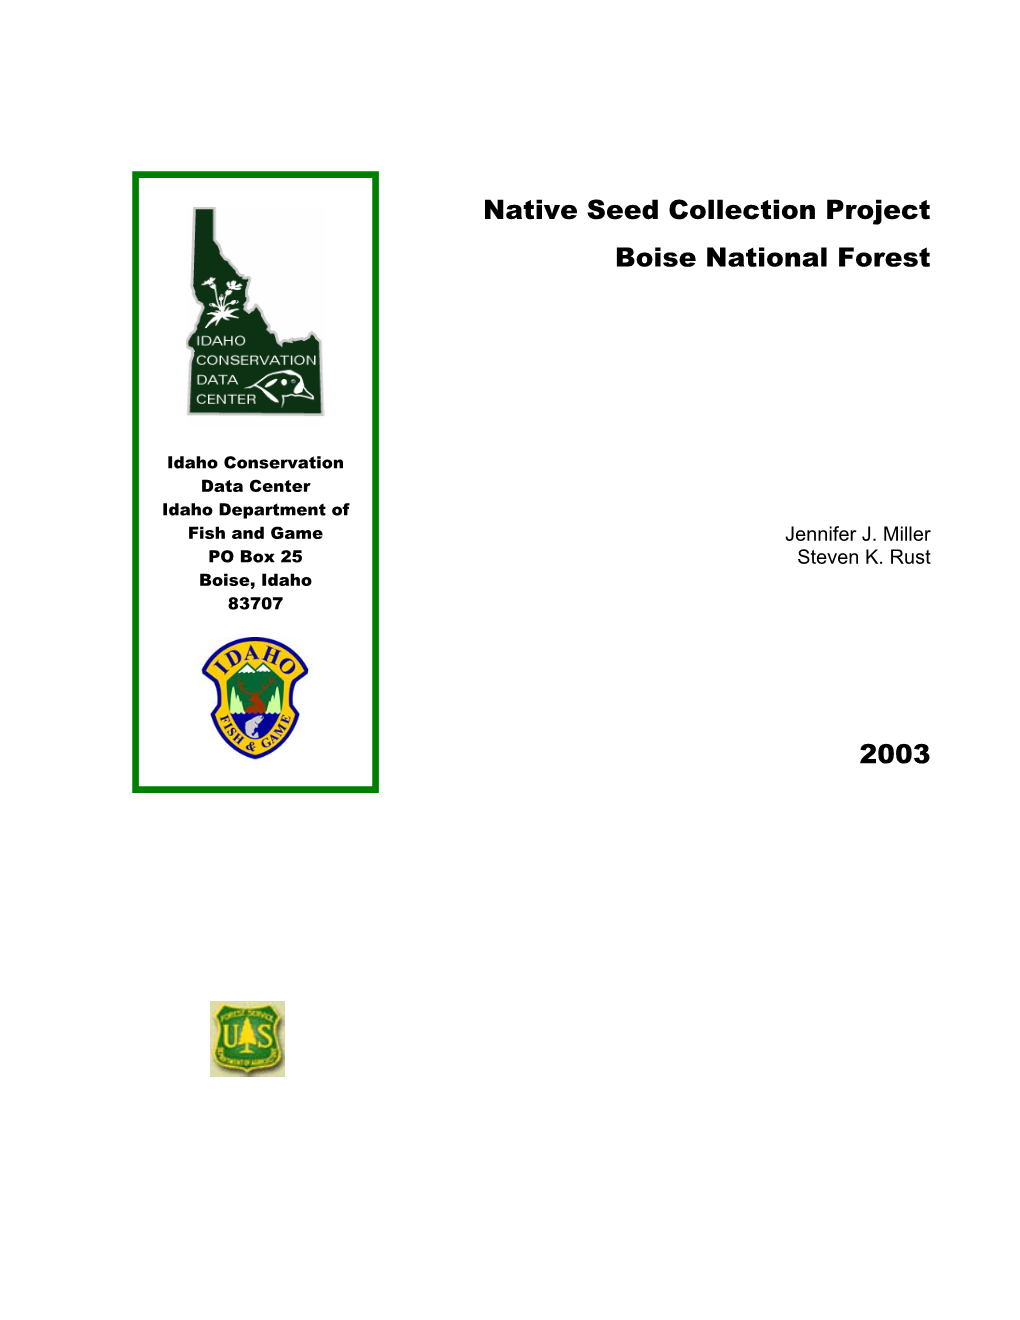 Native Seed Collection Project Boise National Forest